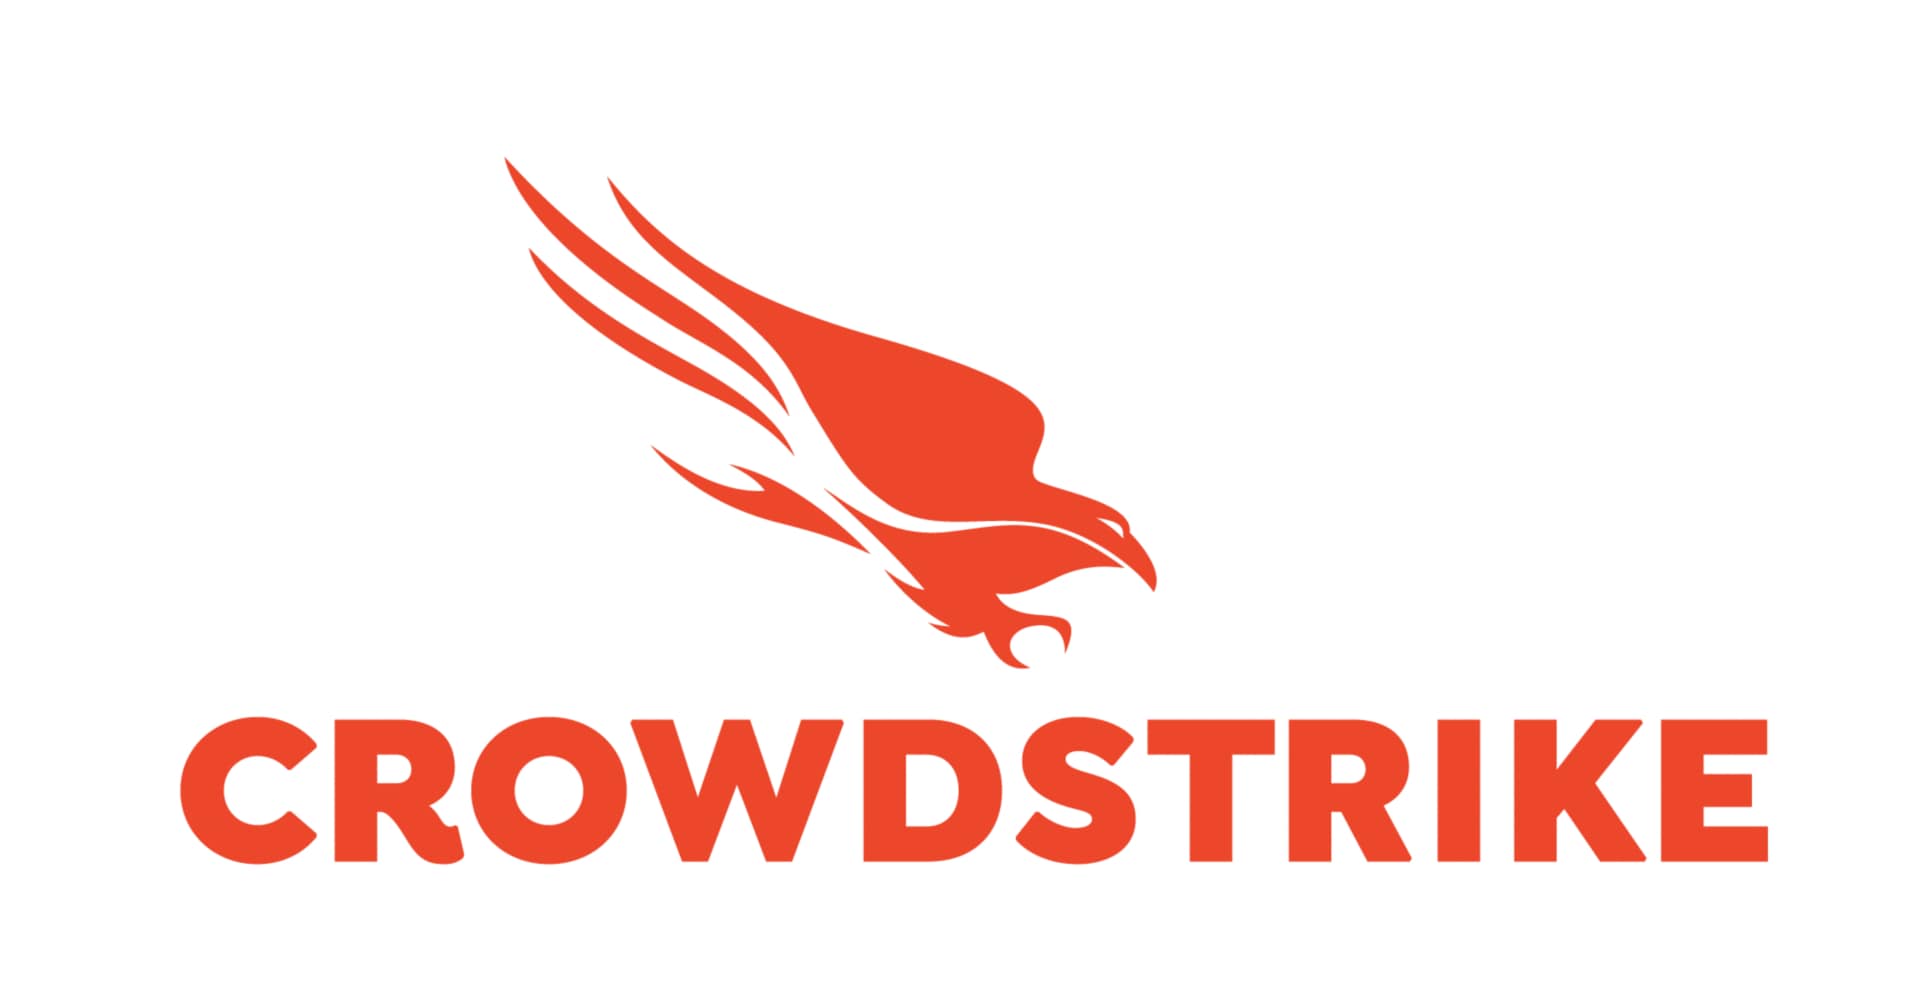 CrowdStrike 11-Month Falcon Device Control Software Subscription (300-499 Licenses)